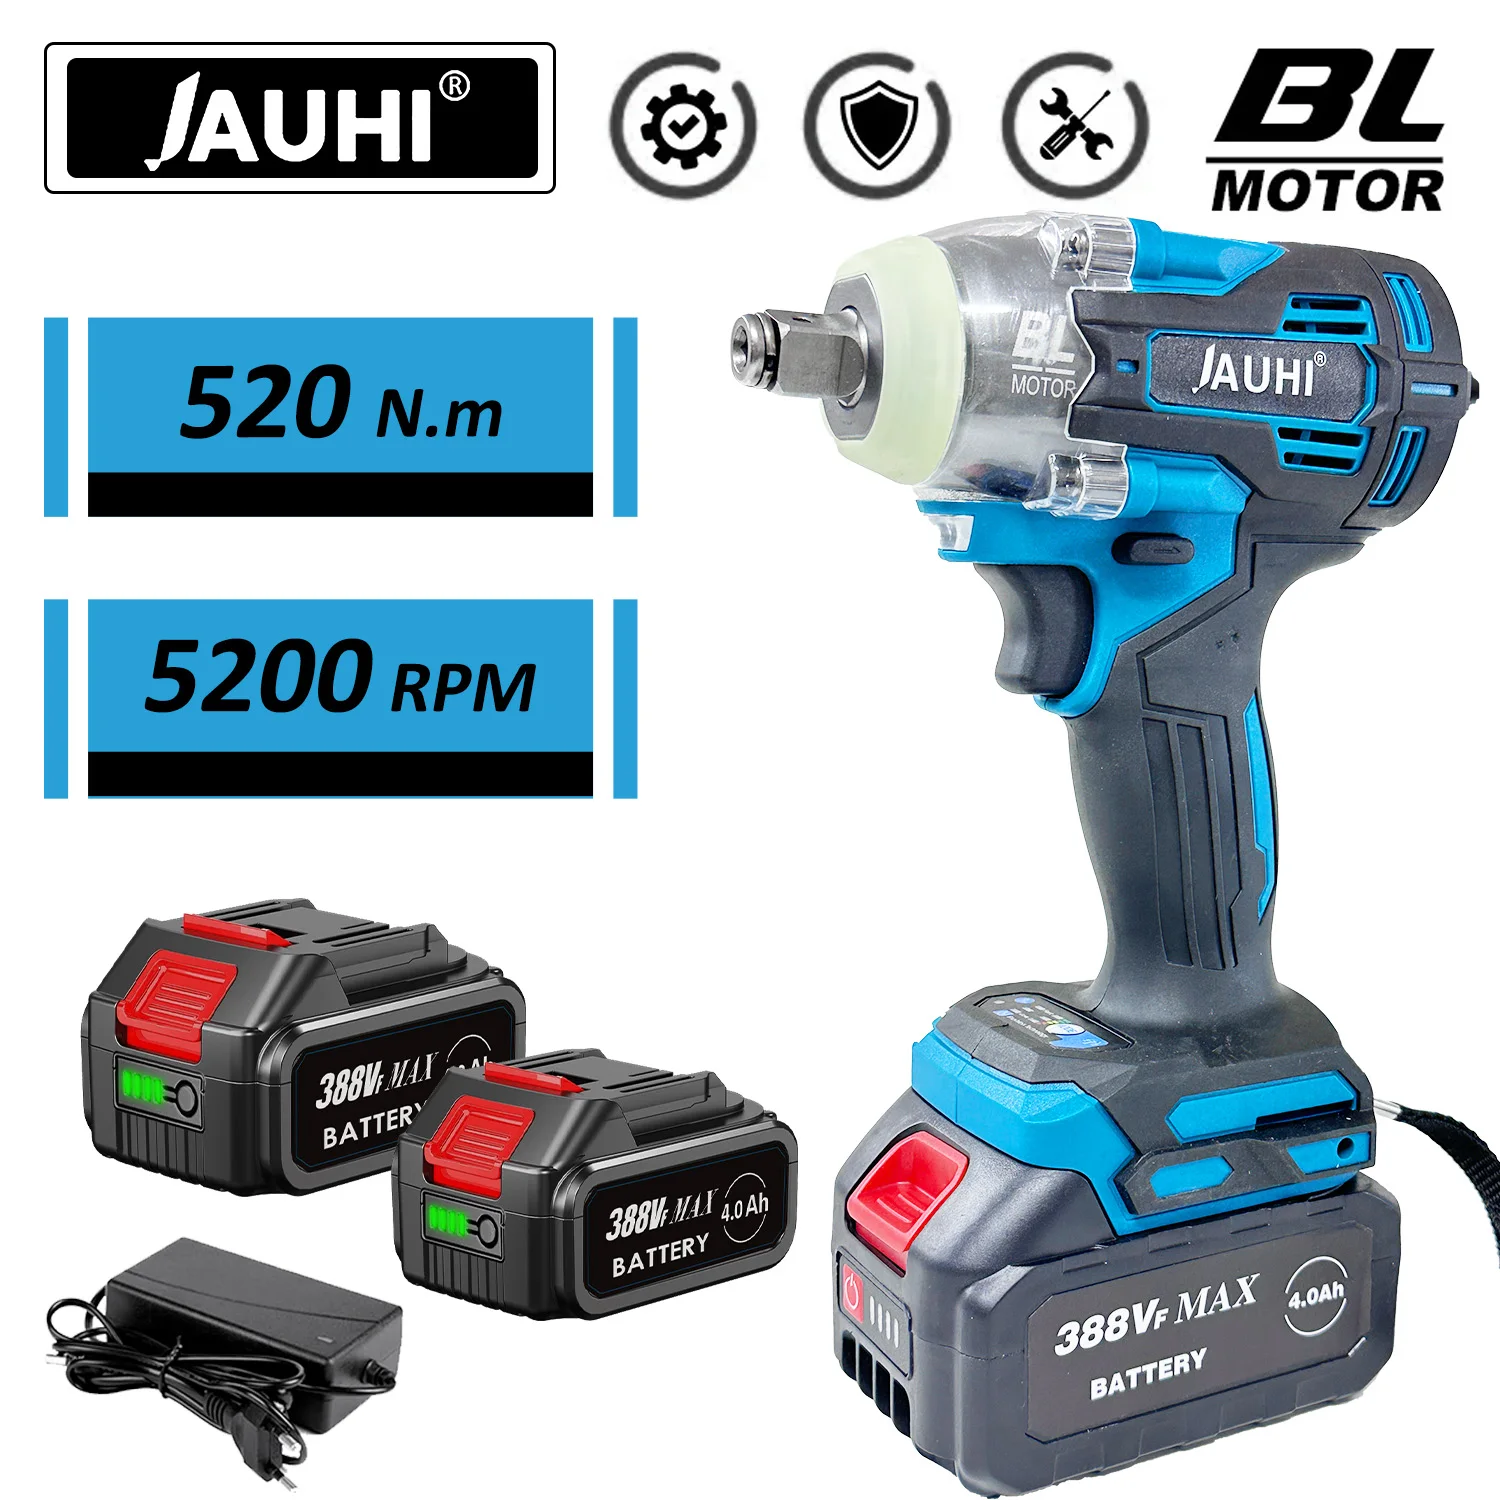 

JAUHI 520N.M Brushless Electric Impact Wrench Cordless Electric Wrench 1/2 inch for Makita 18V Battery Screwdriver Power Tools